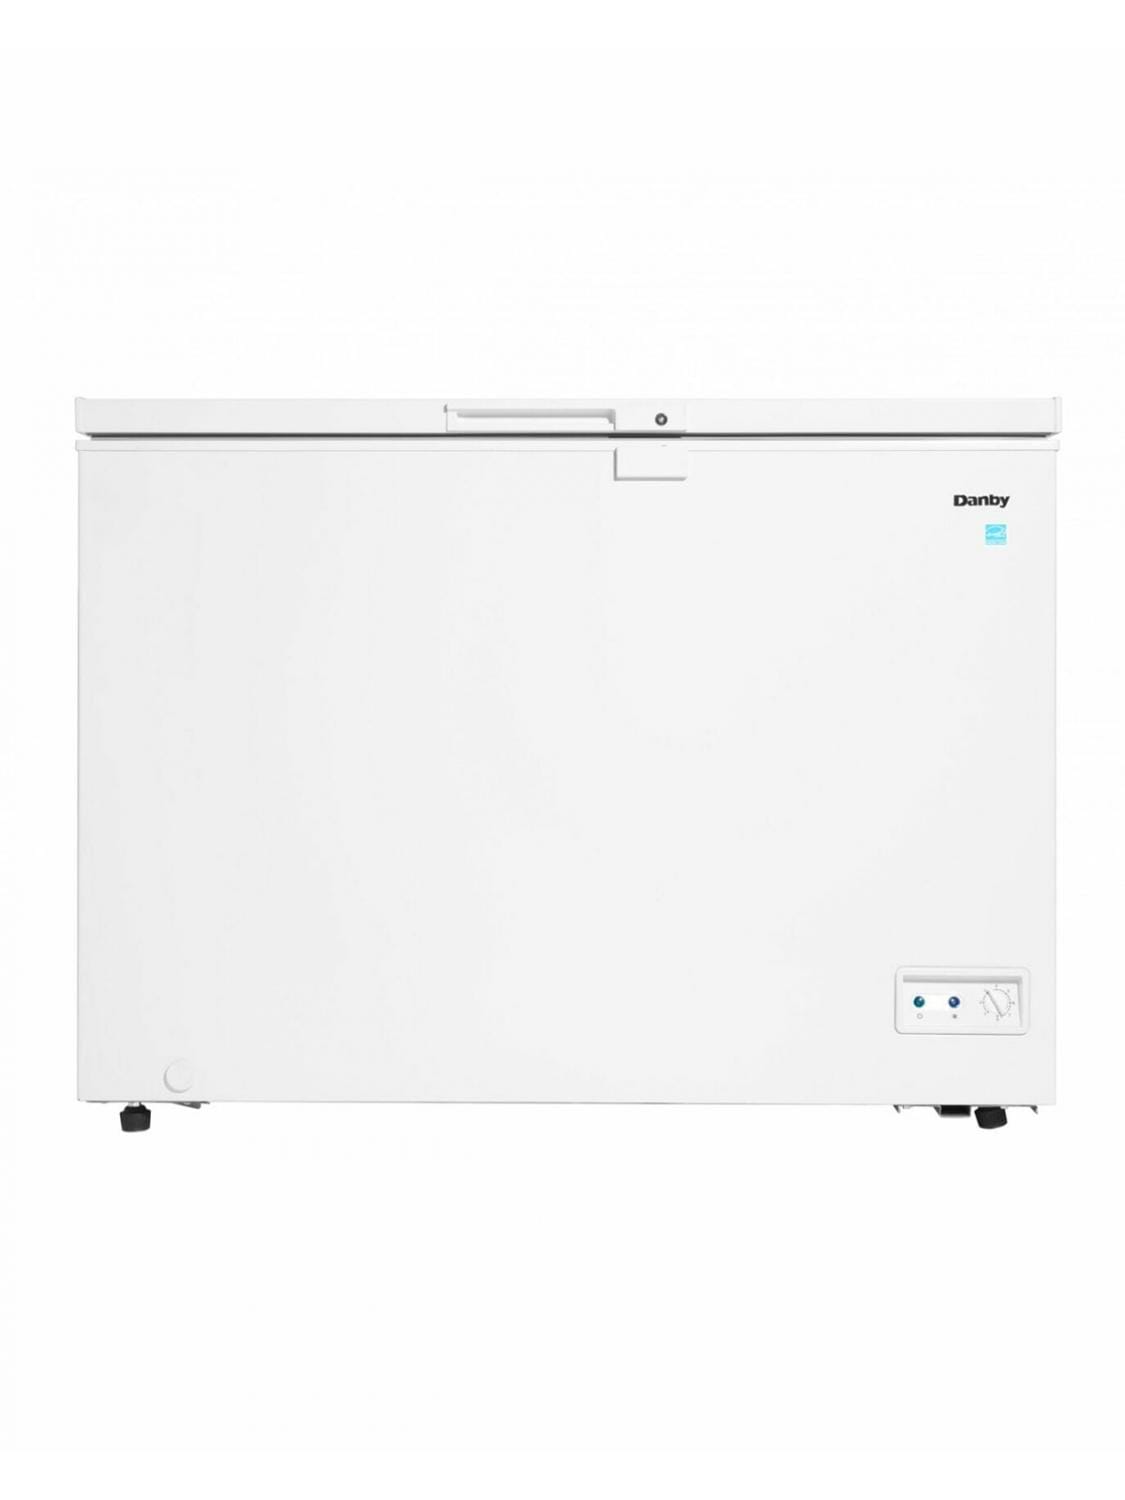 Danby - 10 cu. Ft  Chest Freezer in White - DCF100A5WDB